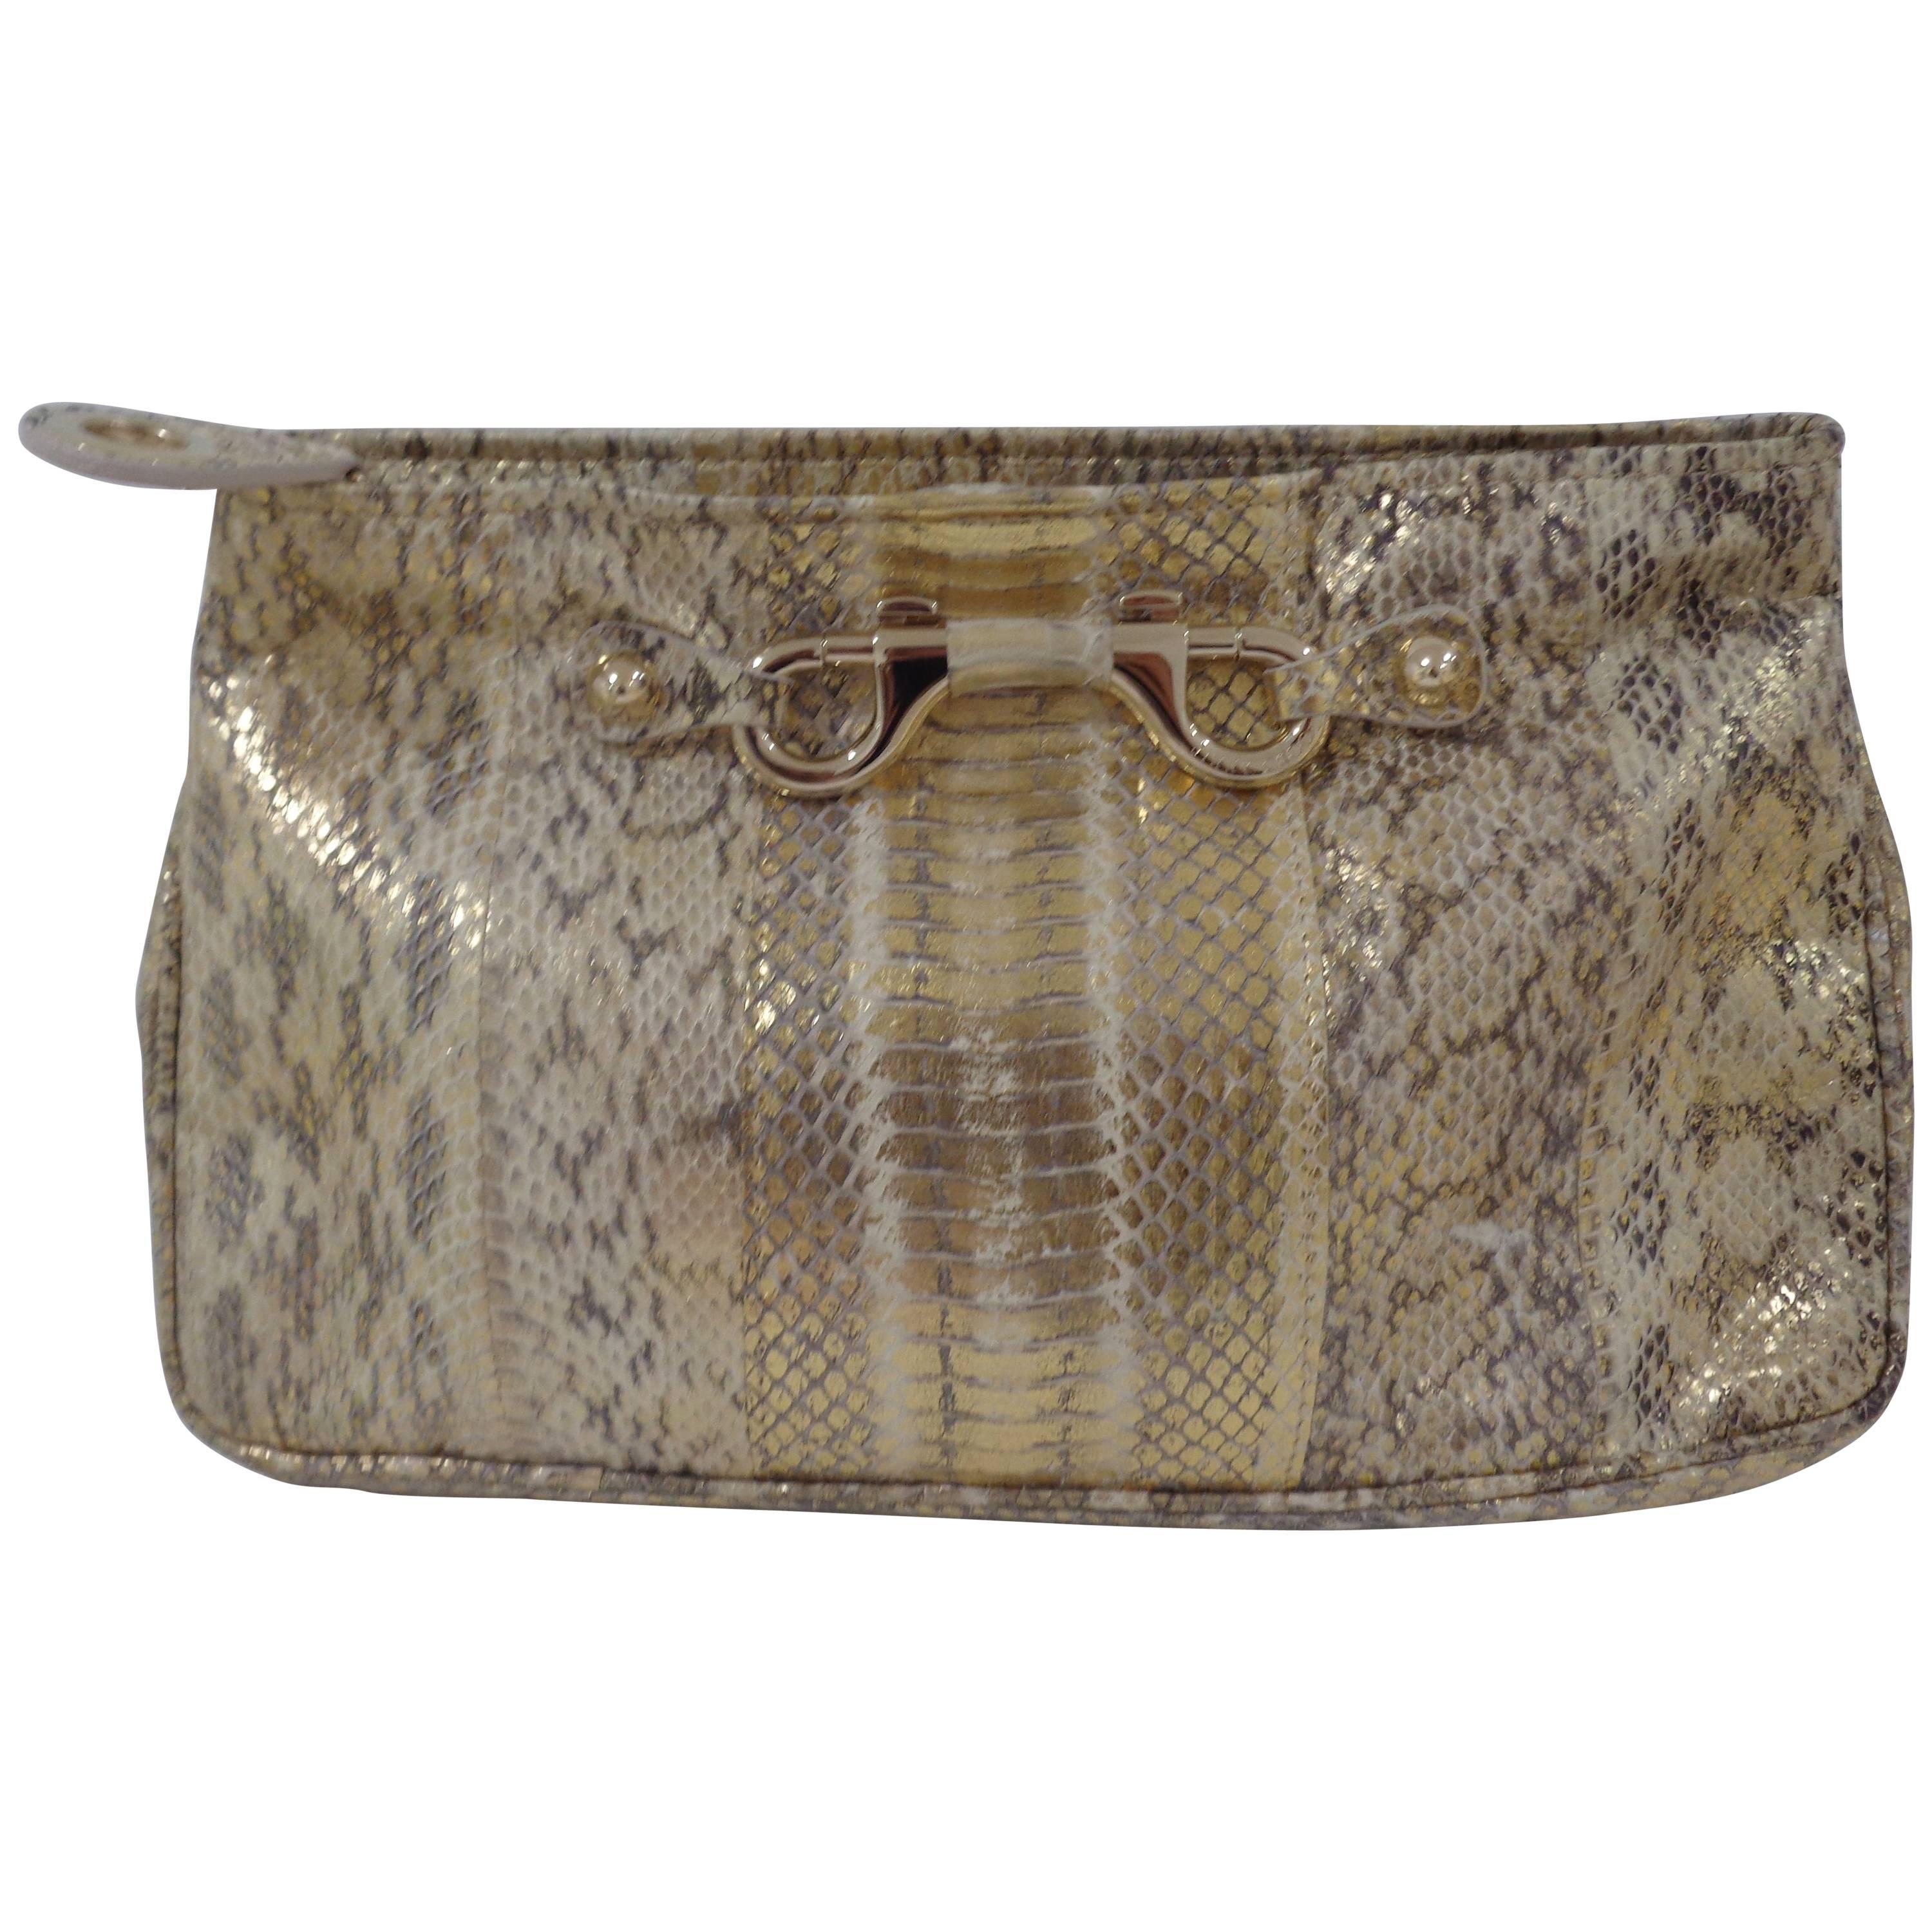 Jimmy Choo gold and silver tone pochette